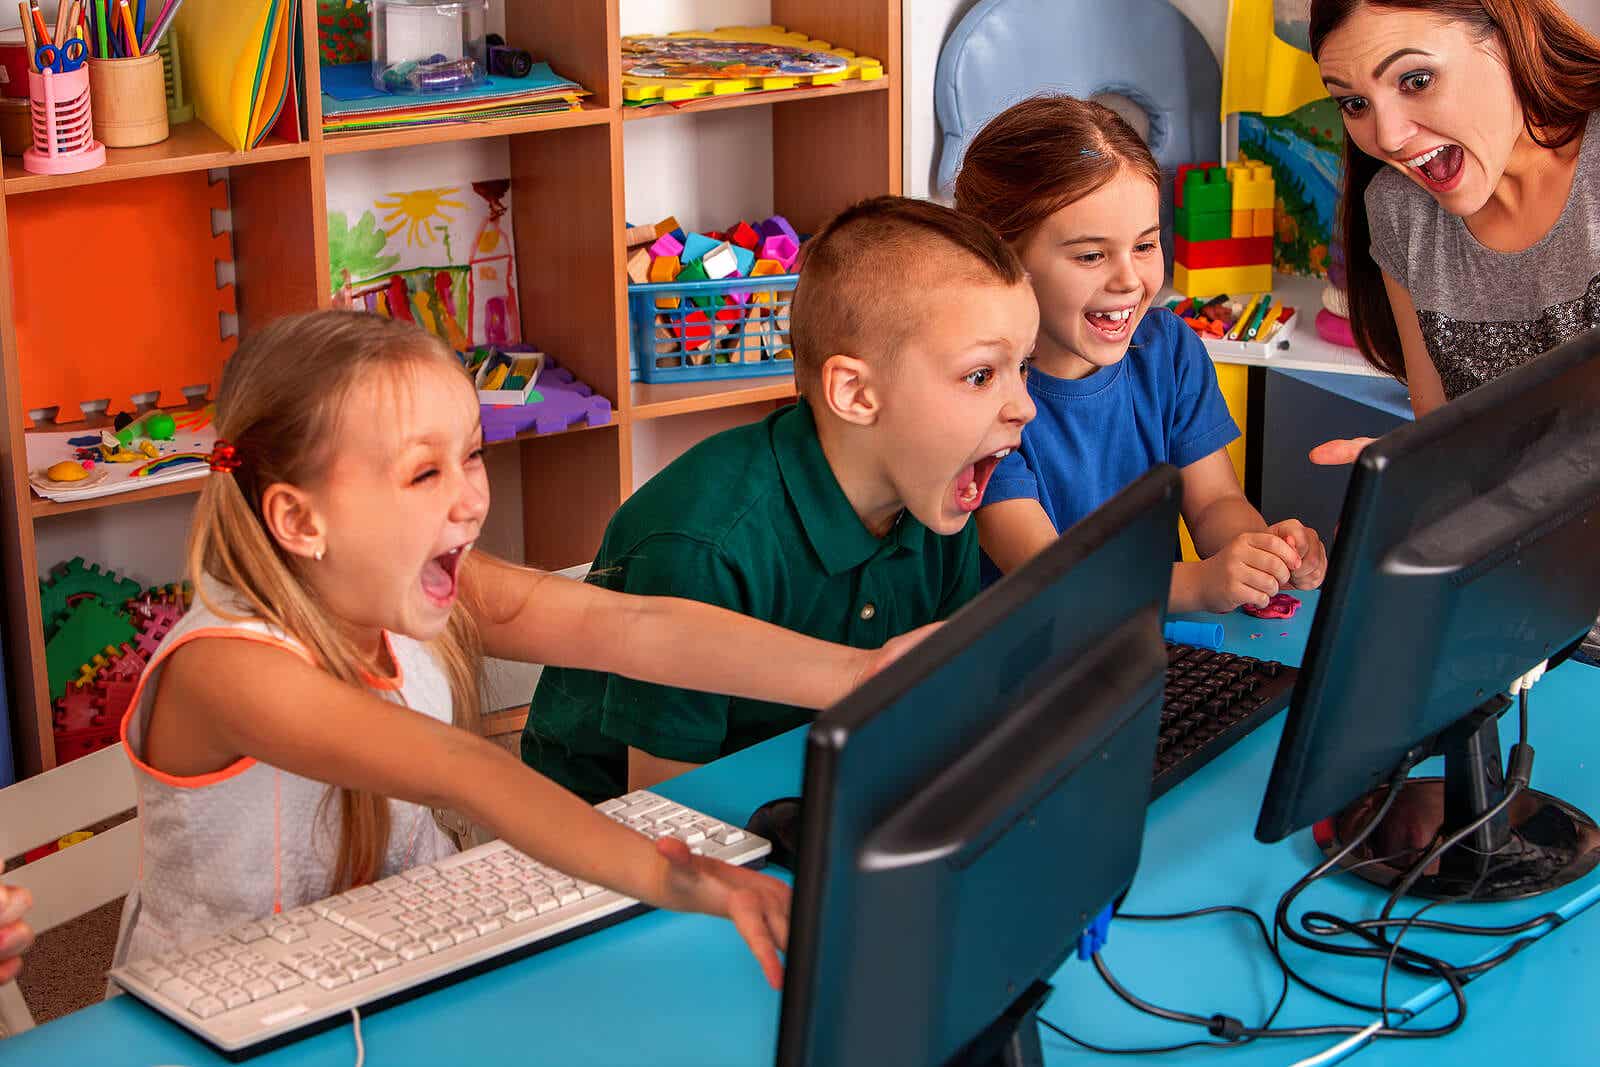 Elementary students excited to learn on computers.